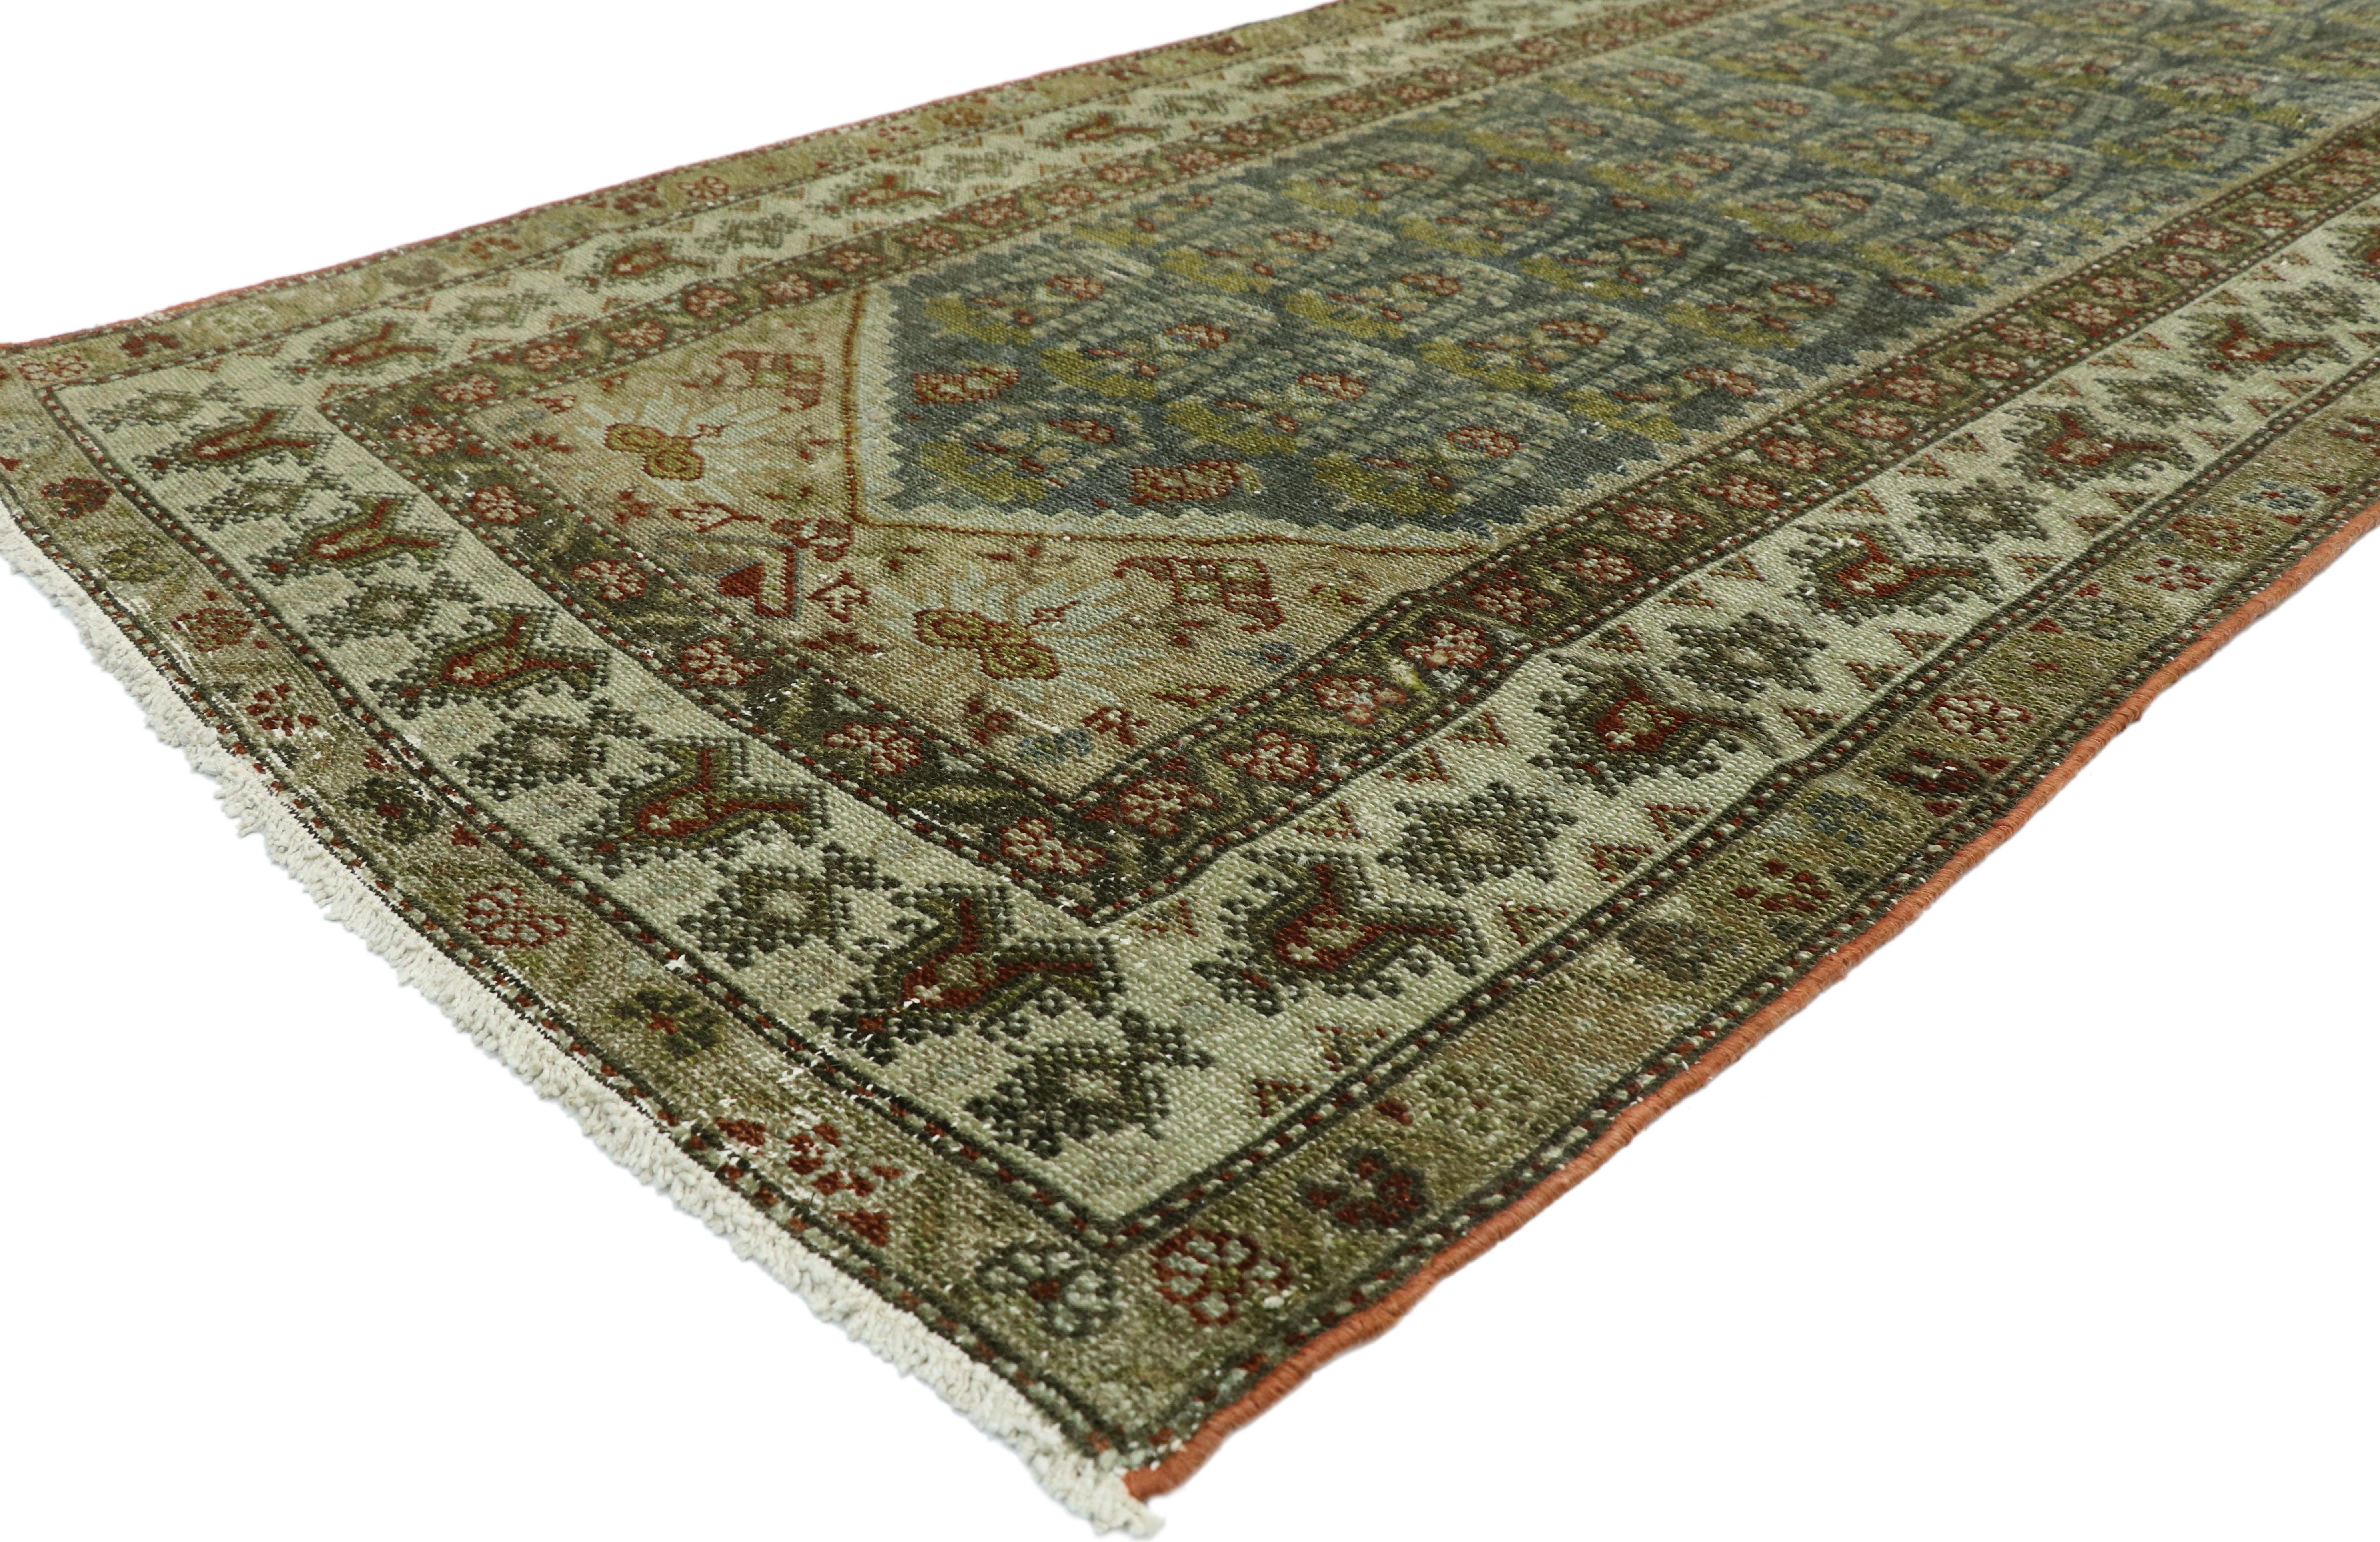 51524 Distressed Antique Persian Malayer Runner with Modern Gustavian Style 03'05 x 16'07. With rustic charm and timeless appeal, this hand knotted wool distressed antique Persian Malayer runner can beautifully blend traditional, modern, and